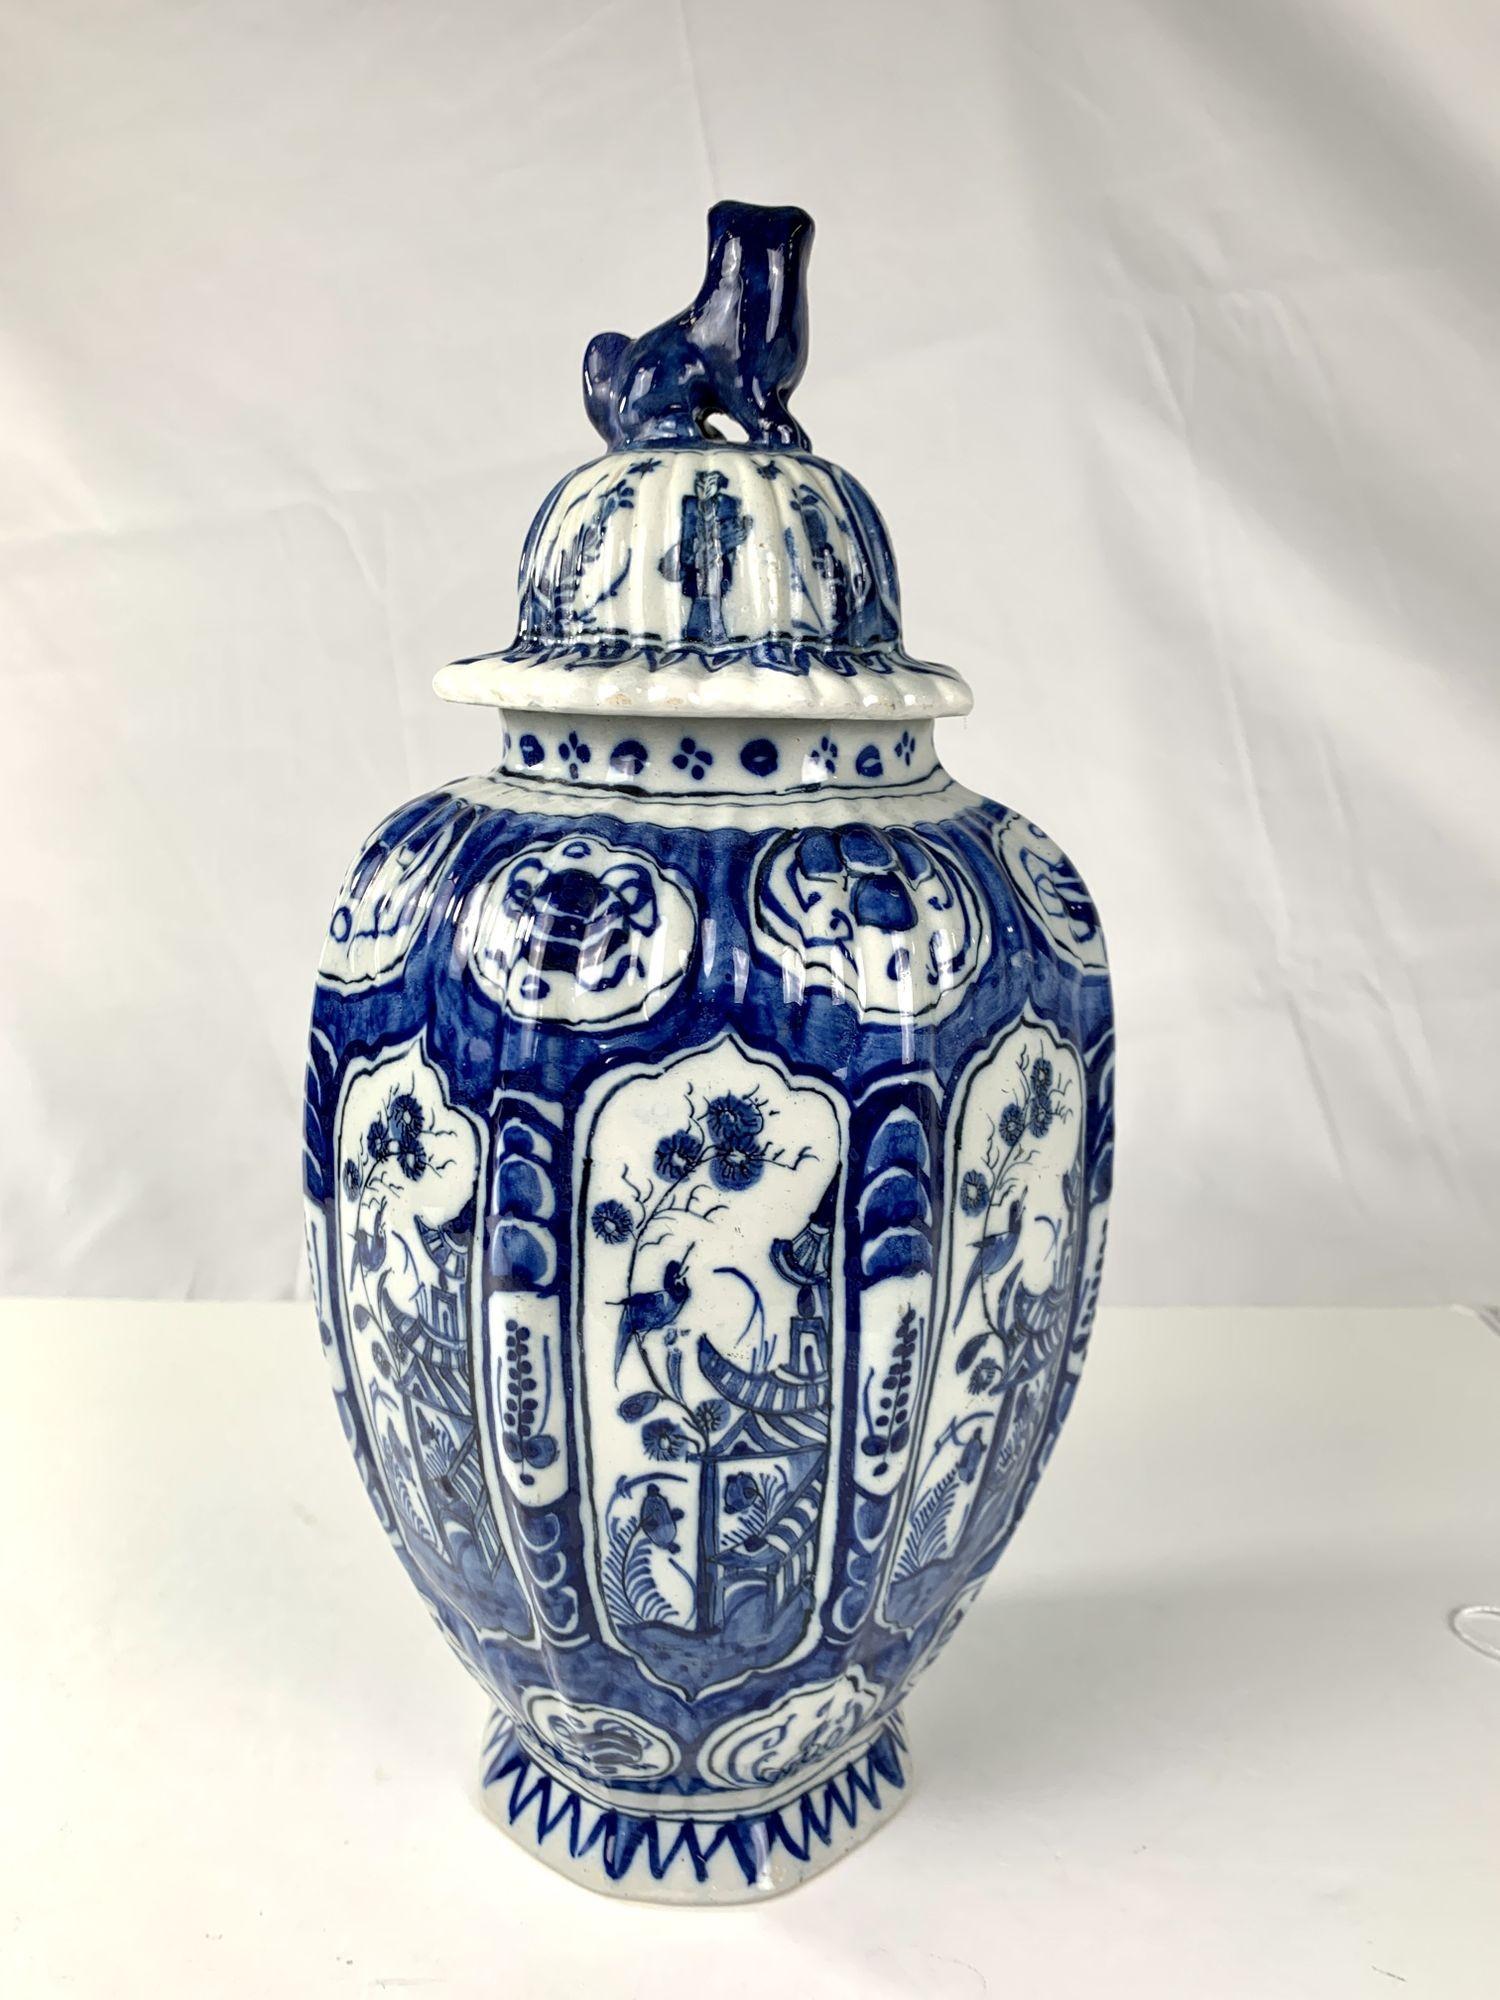 Hand-Painted Blue and White Dutch Delft Jar Made Circa 1800